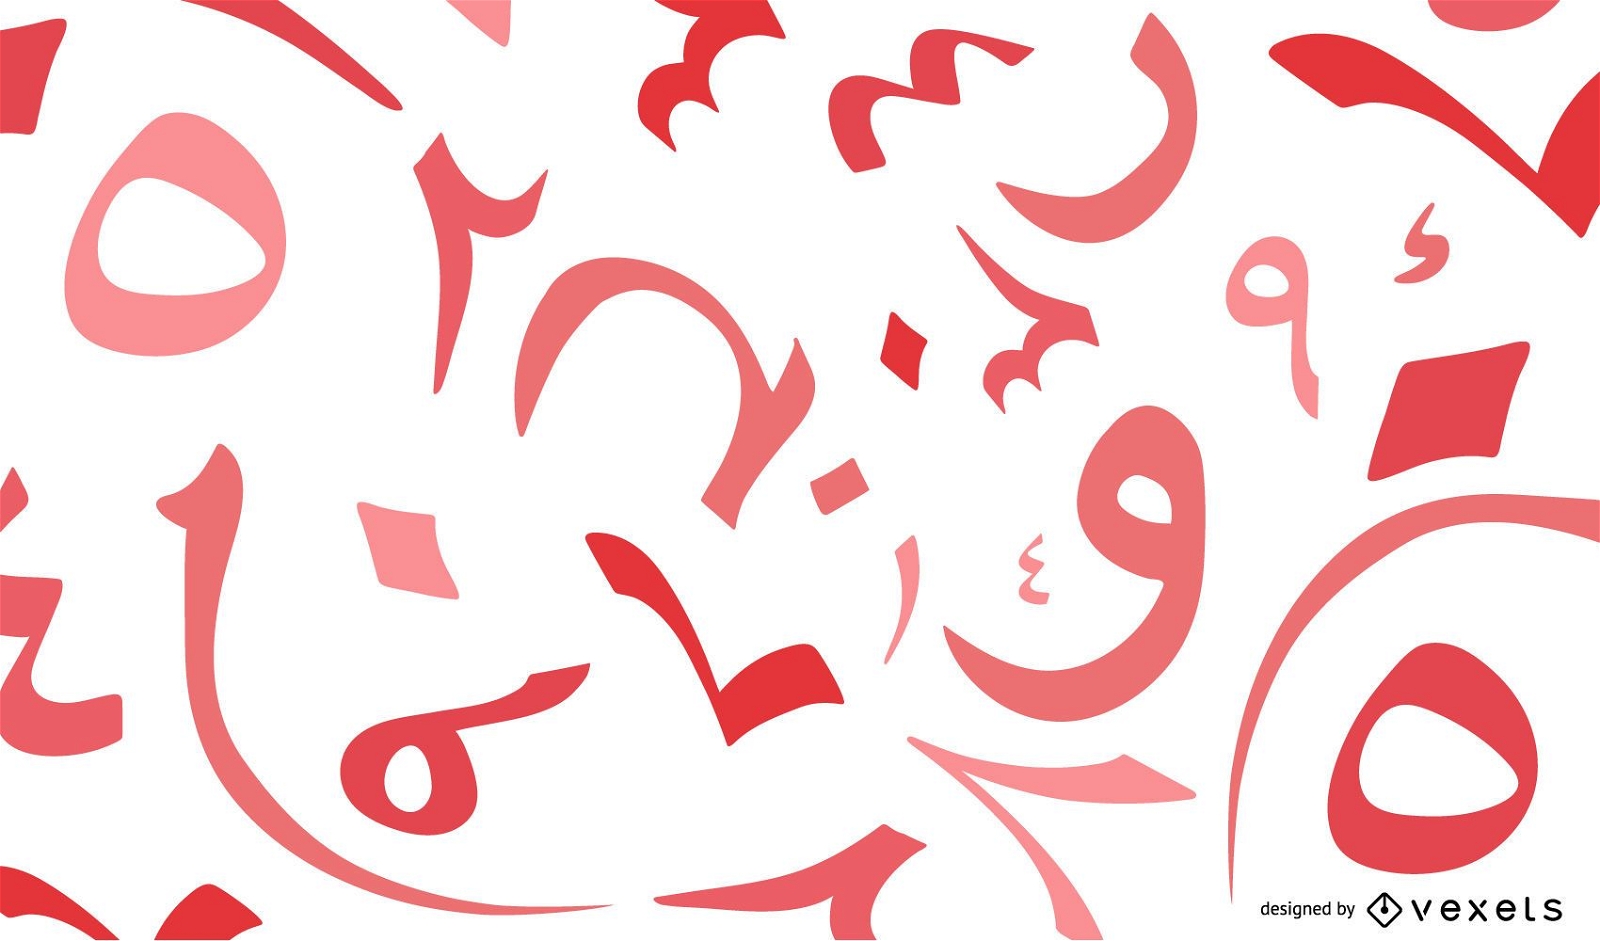 Aeabic numbers red background design